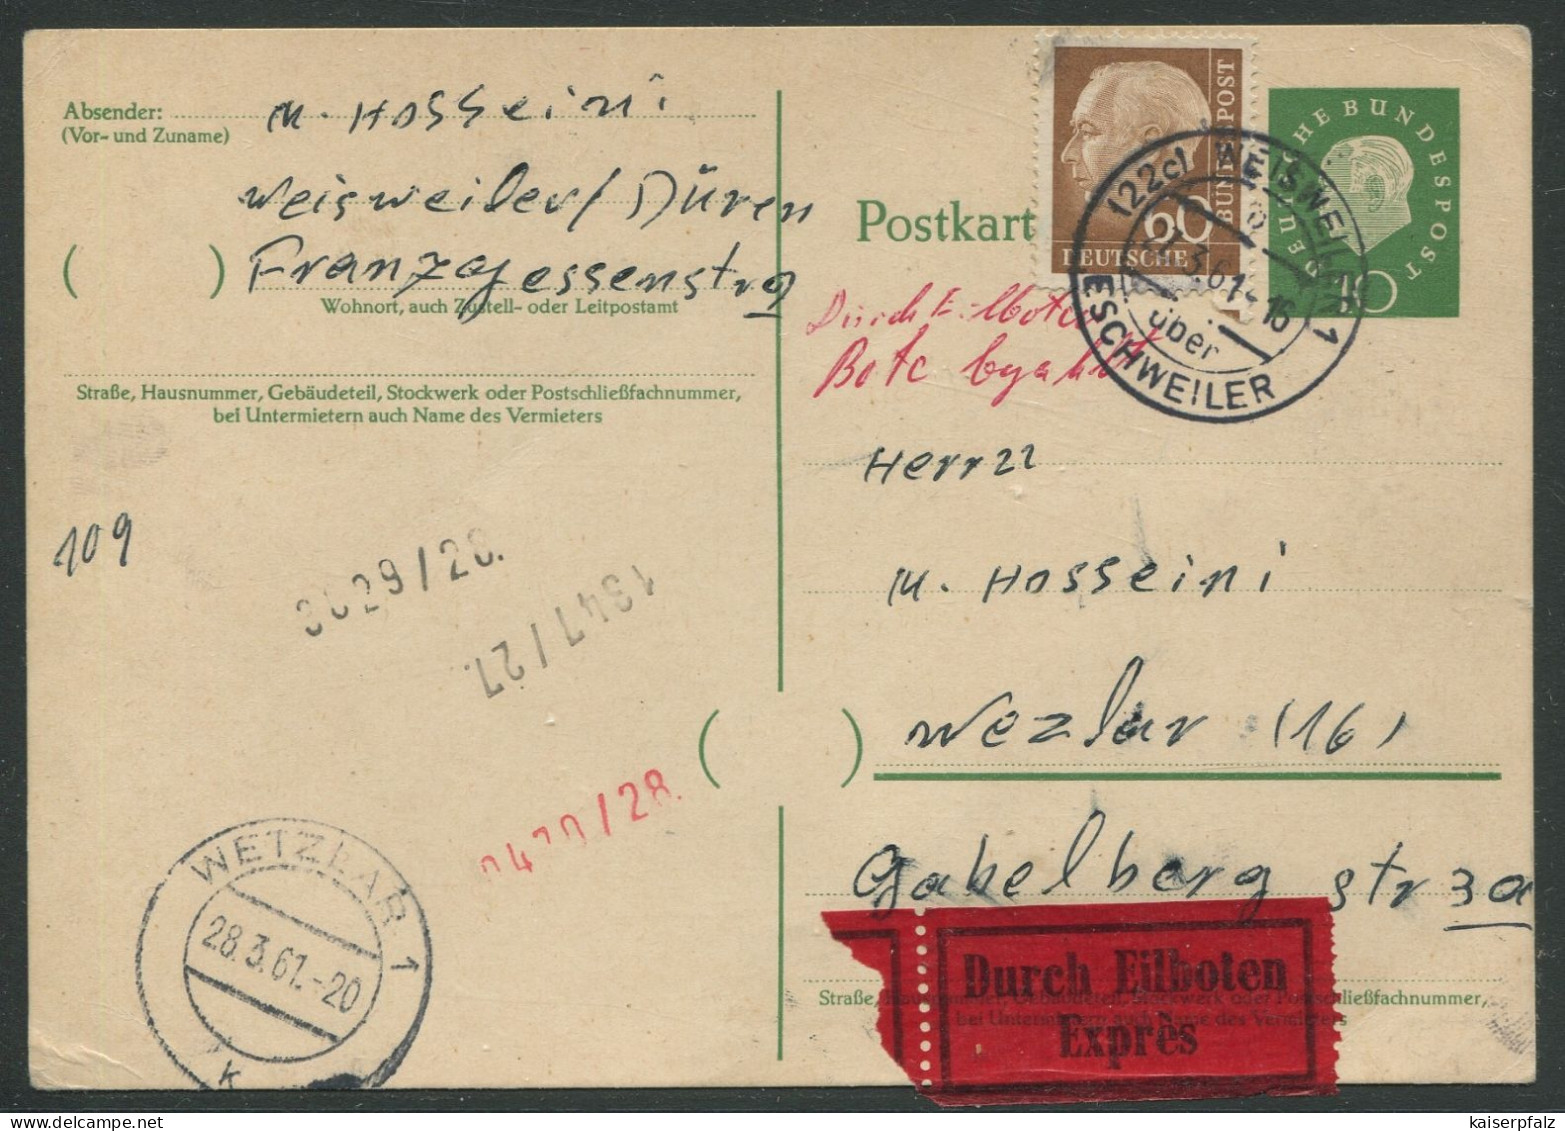 10.161) MiNr.: P 37 - Mit Heus II 60 - Weisweiler -Pst.II - Postcards - Used